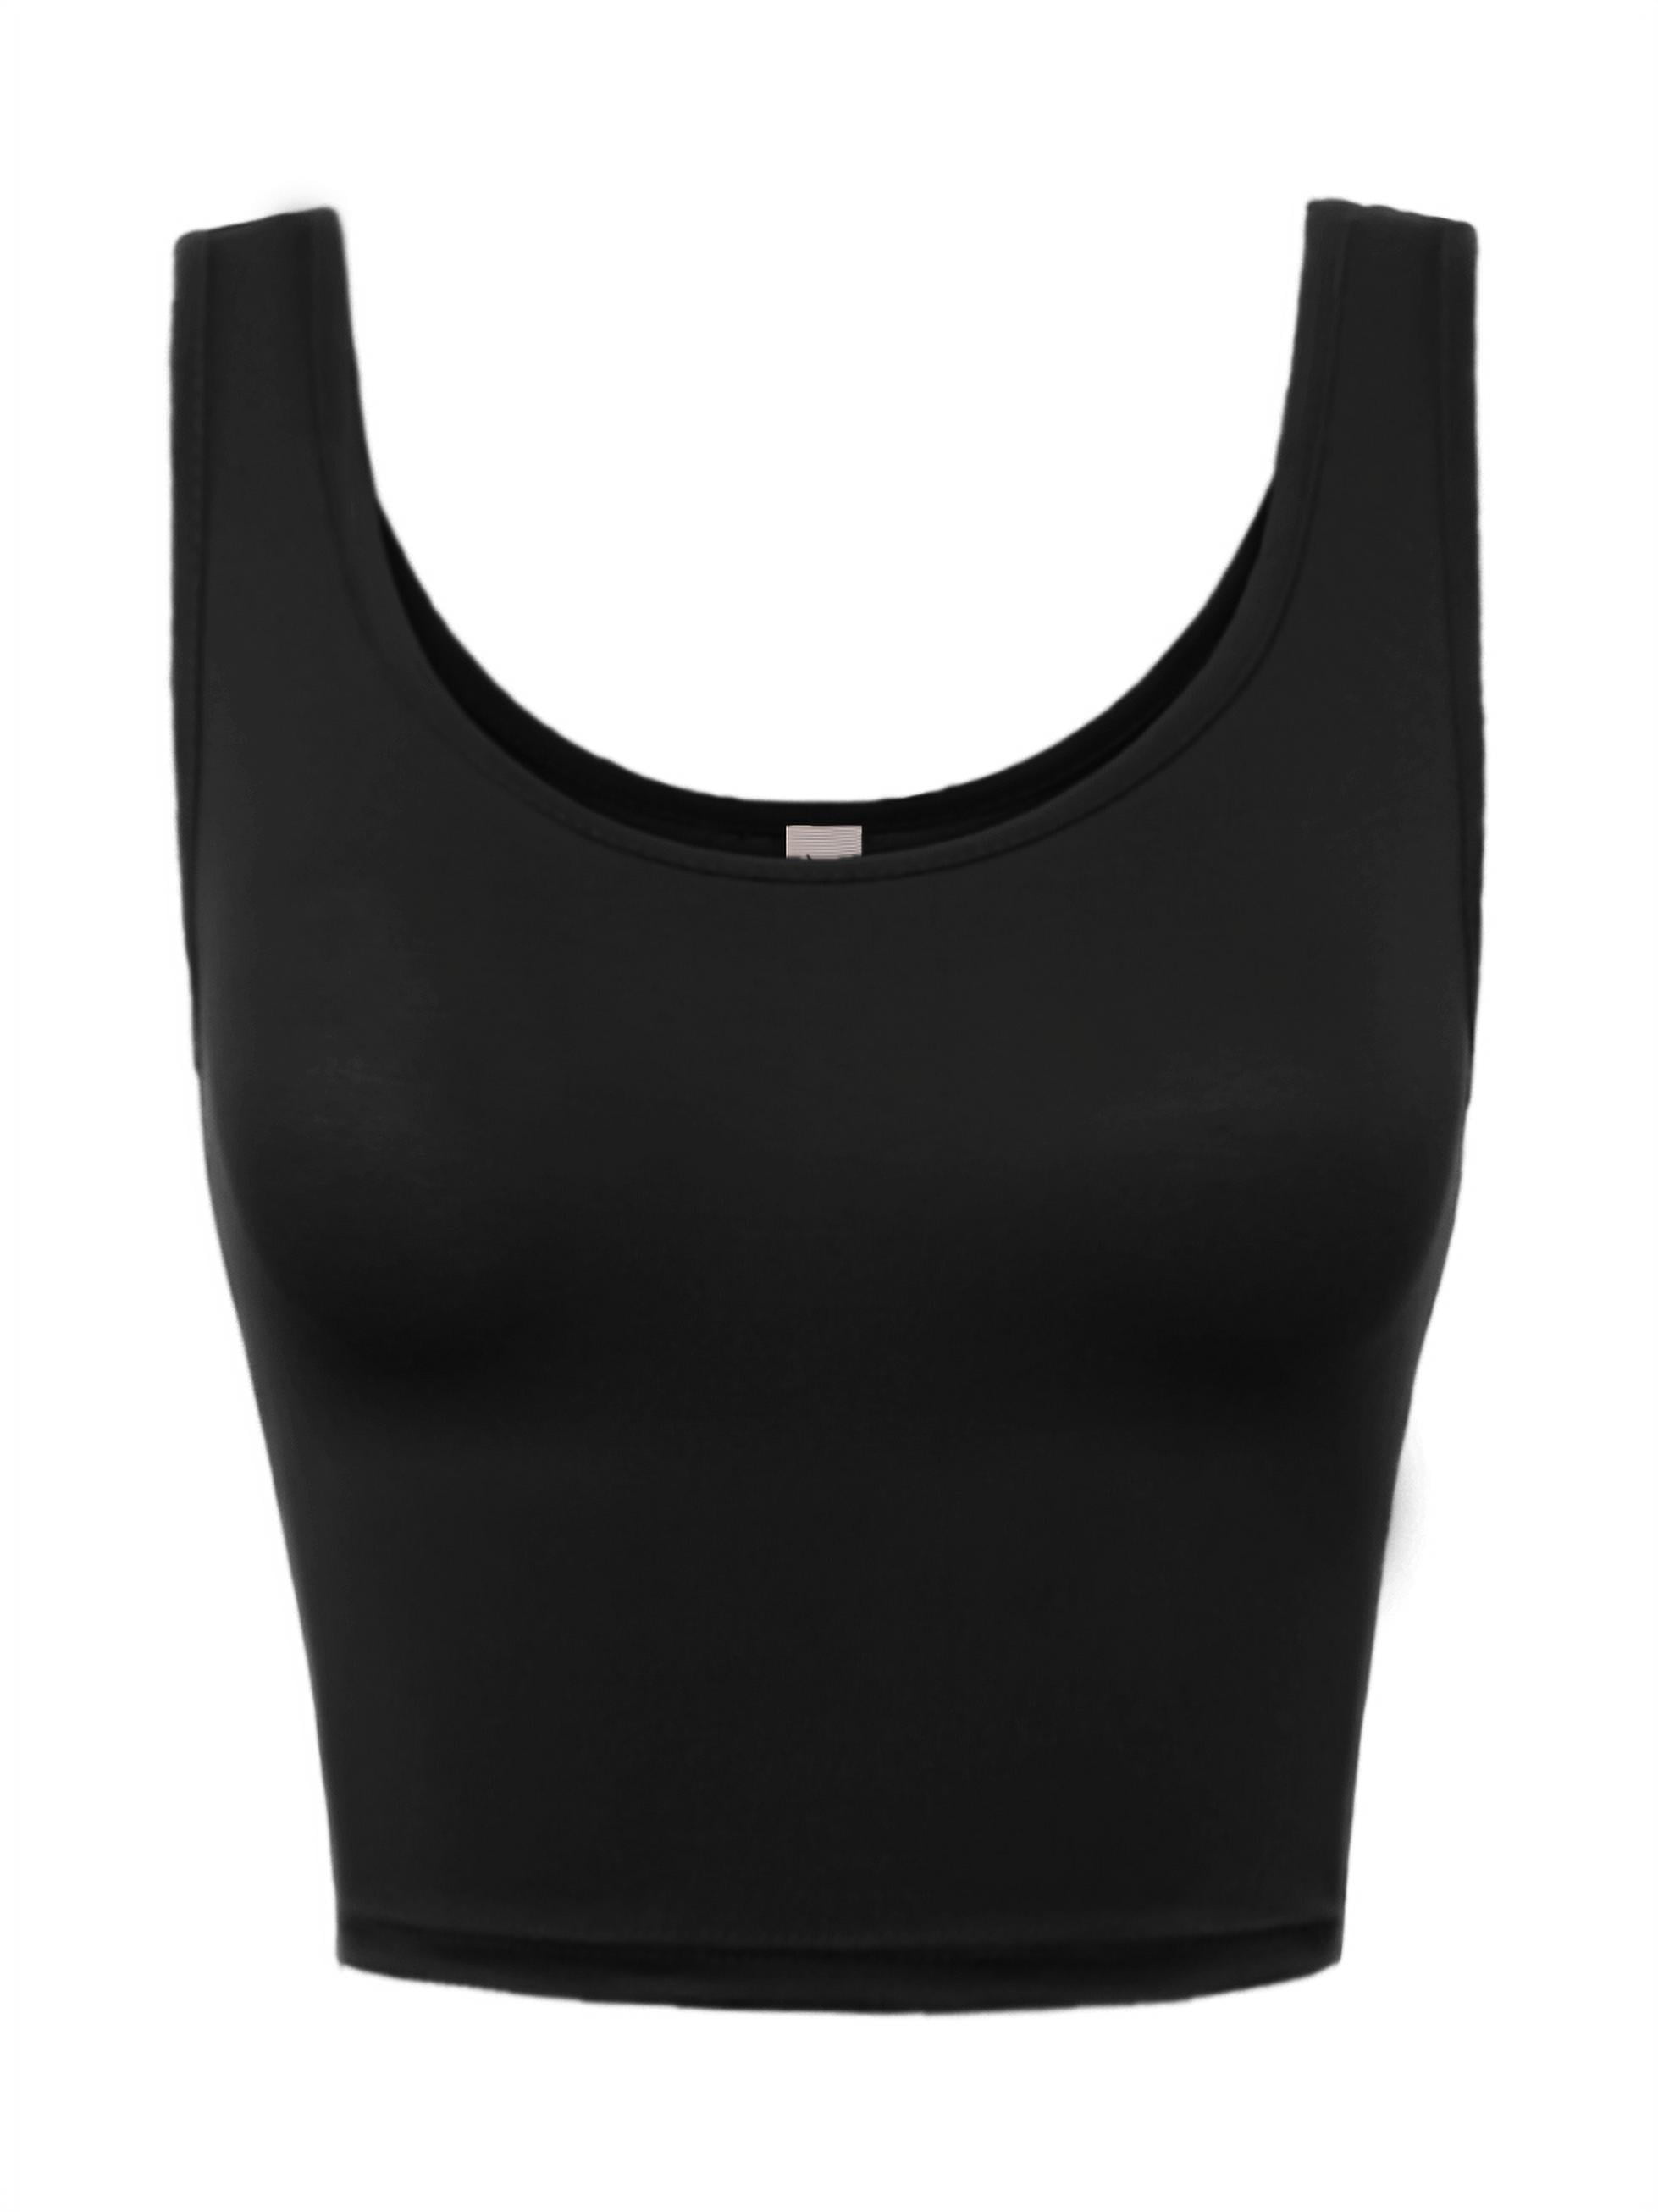 A2Y Women's Fitted Rayon Scoop Neck Sleeveless Crop Tank Top Black S